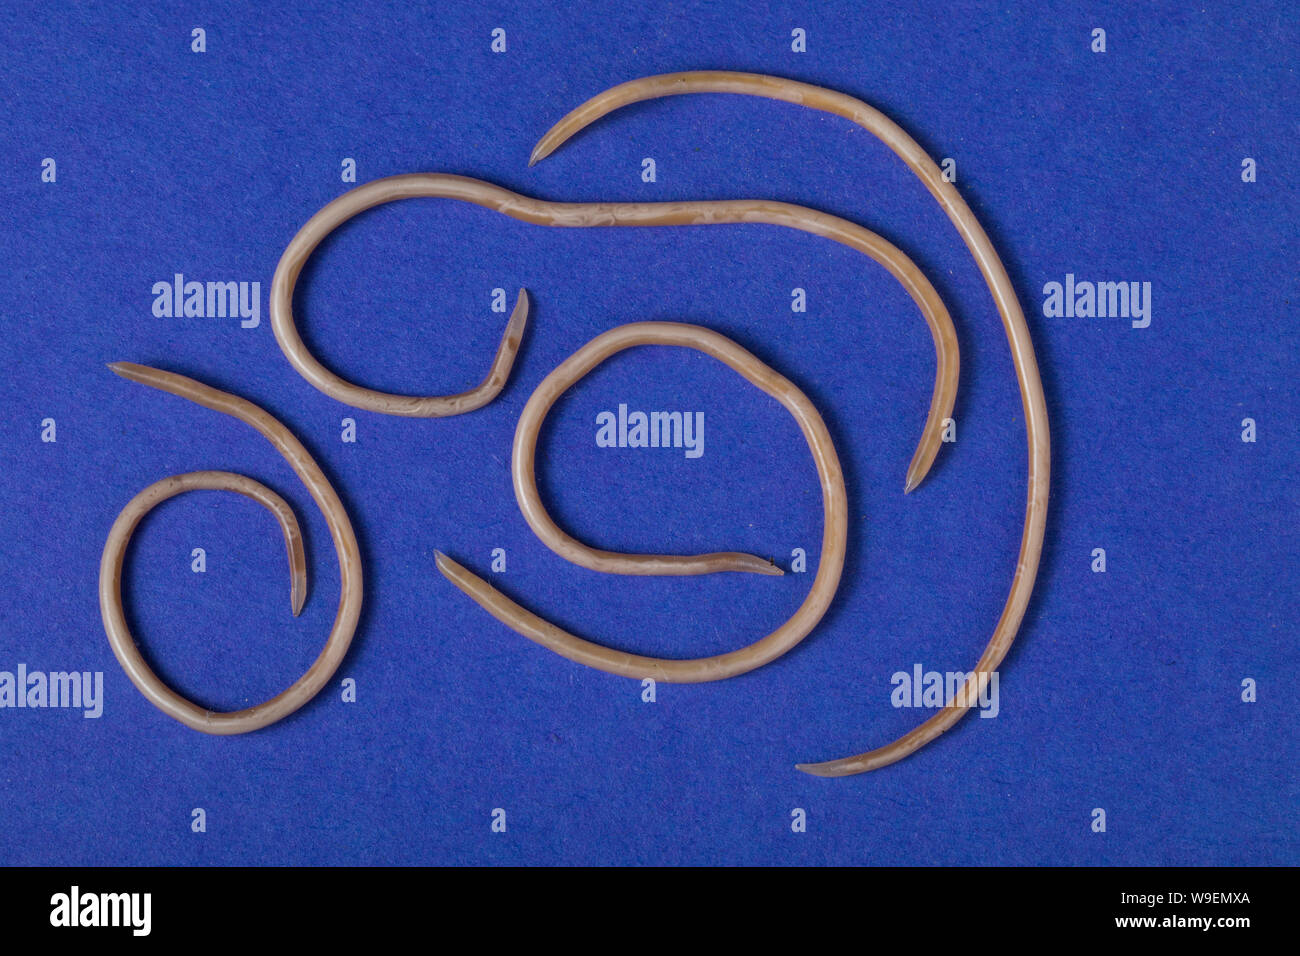 Nematoden High Resolution Stock Photography and Images - Alamy